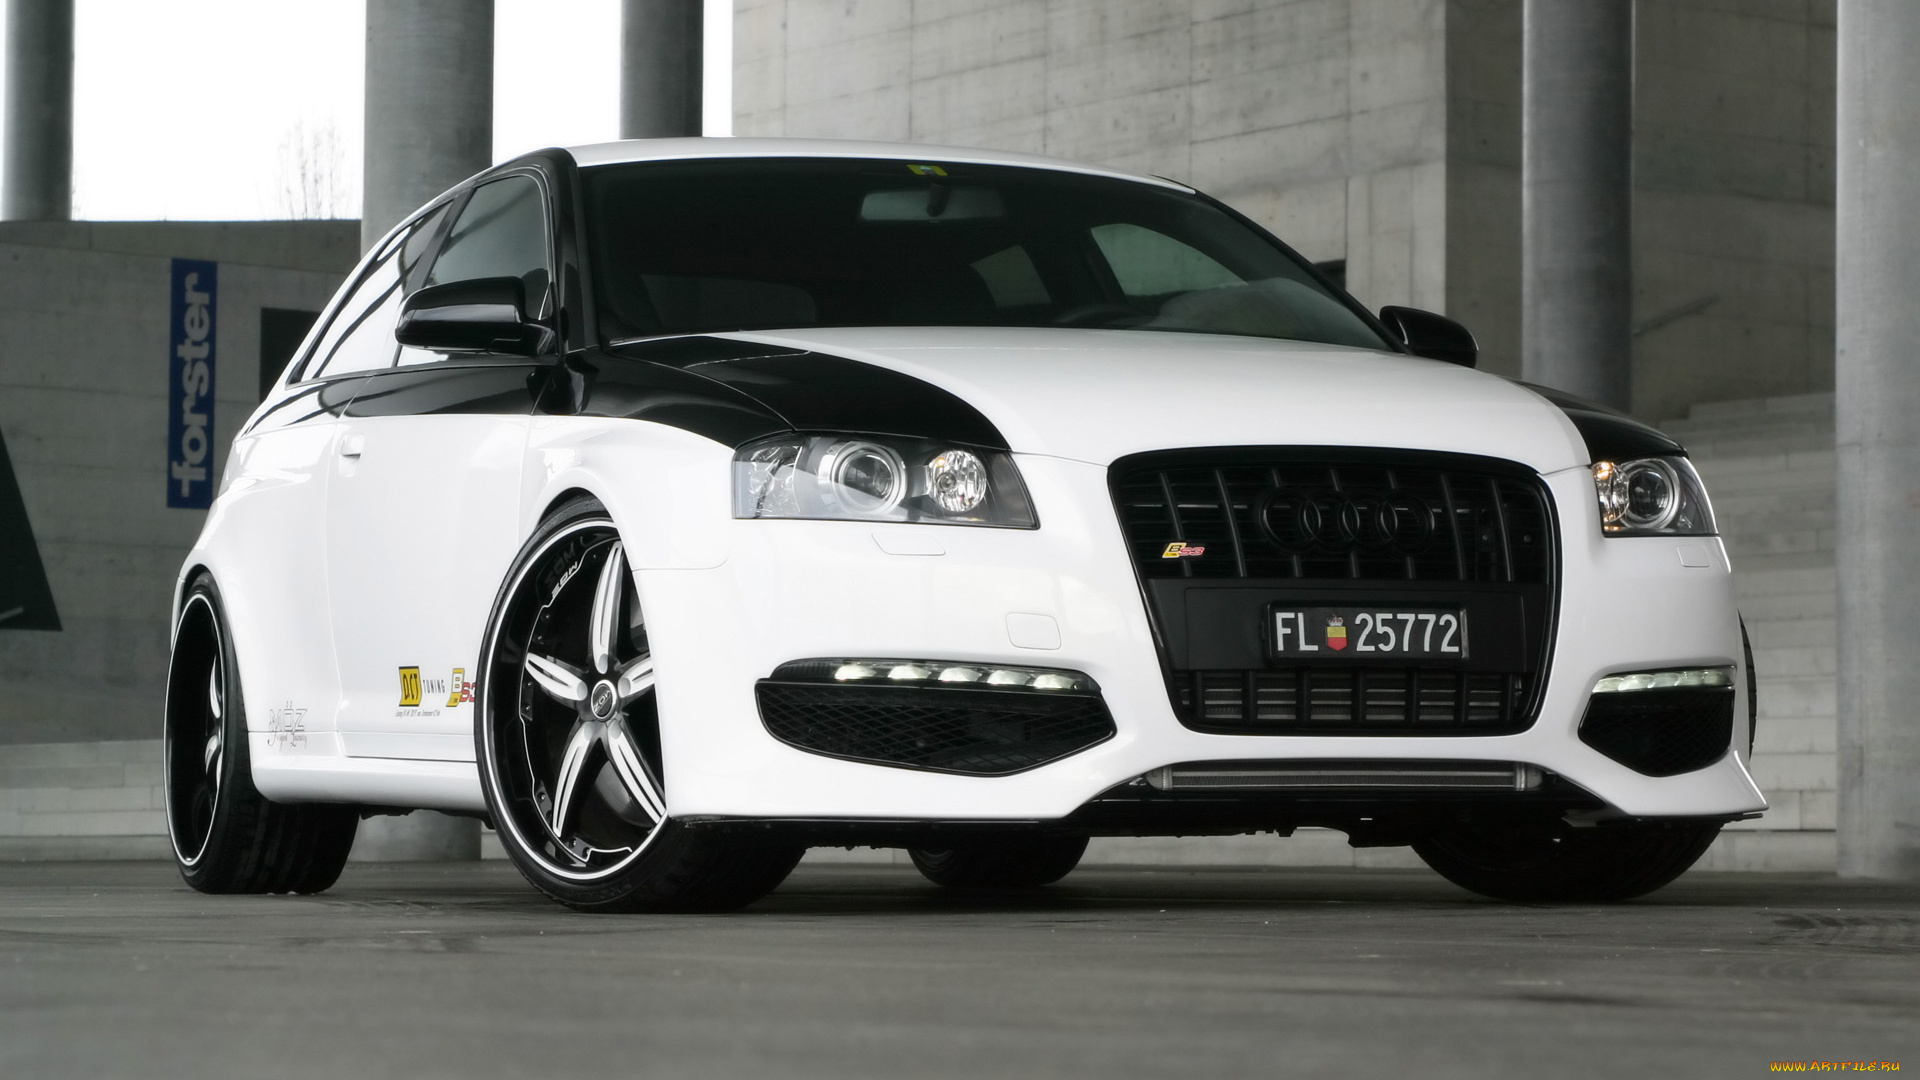 2009, boehler, concept, audi, bs3, by, oct, tuning, автомобили